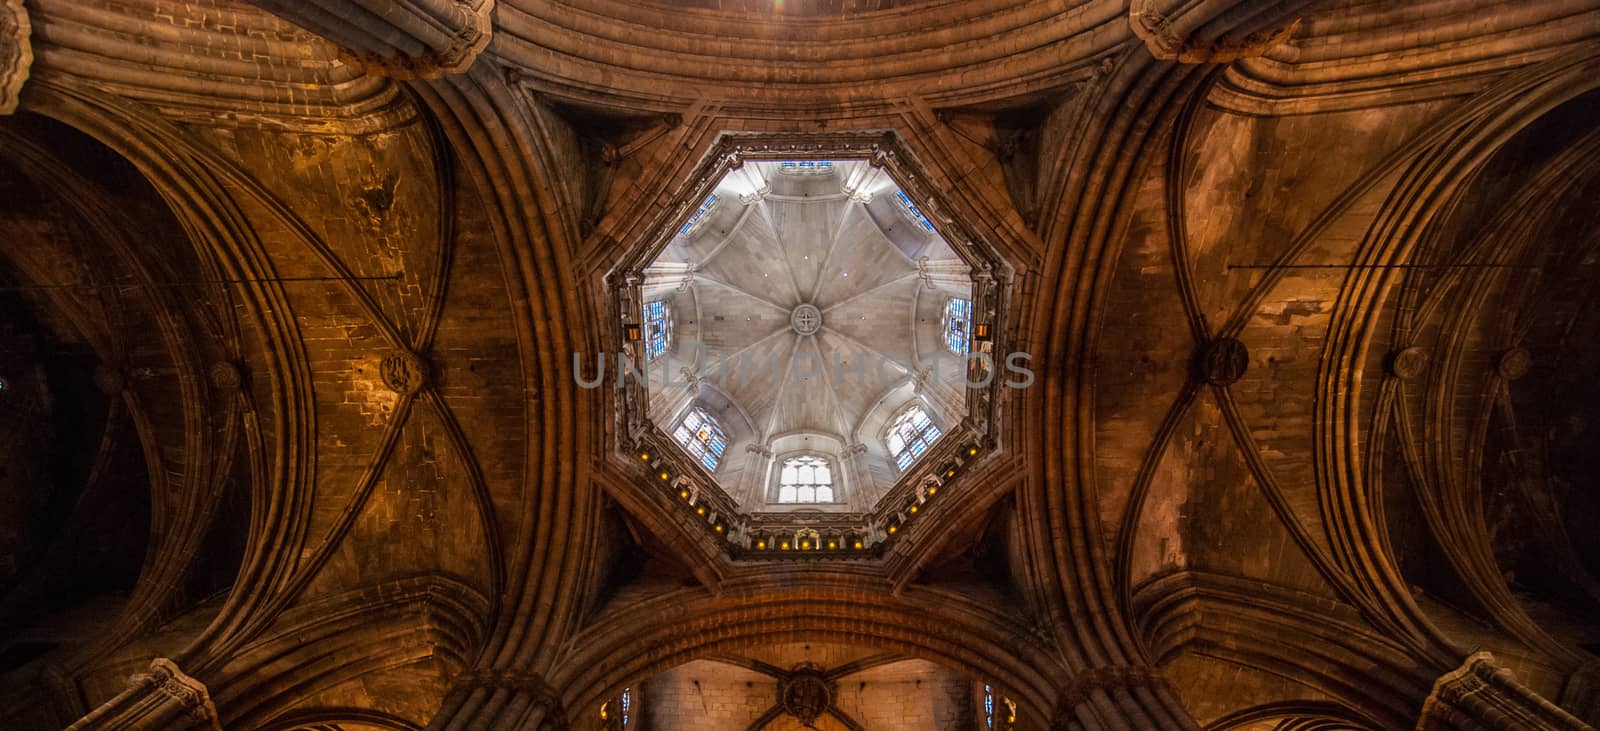 Inside a Cathedral in Barcelona, Spain by valleyboi63